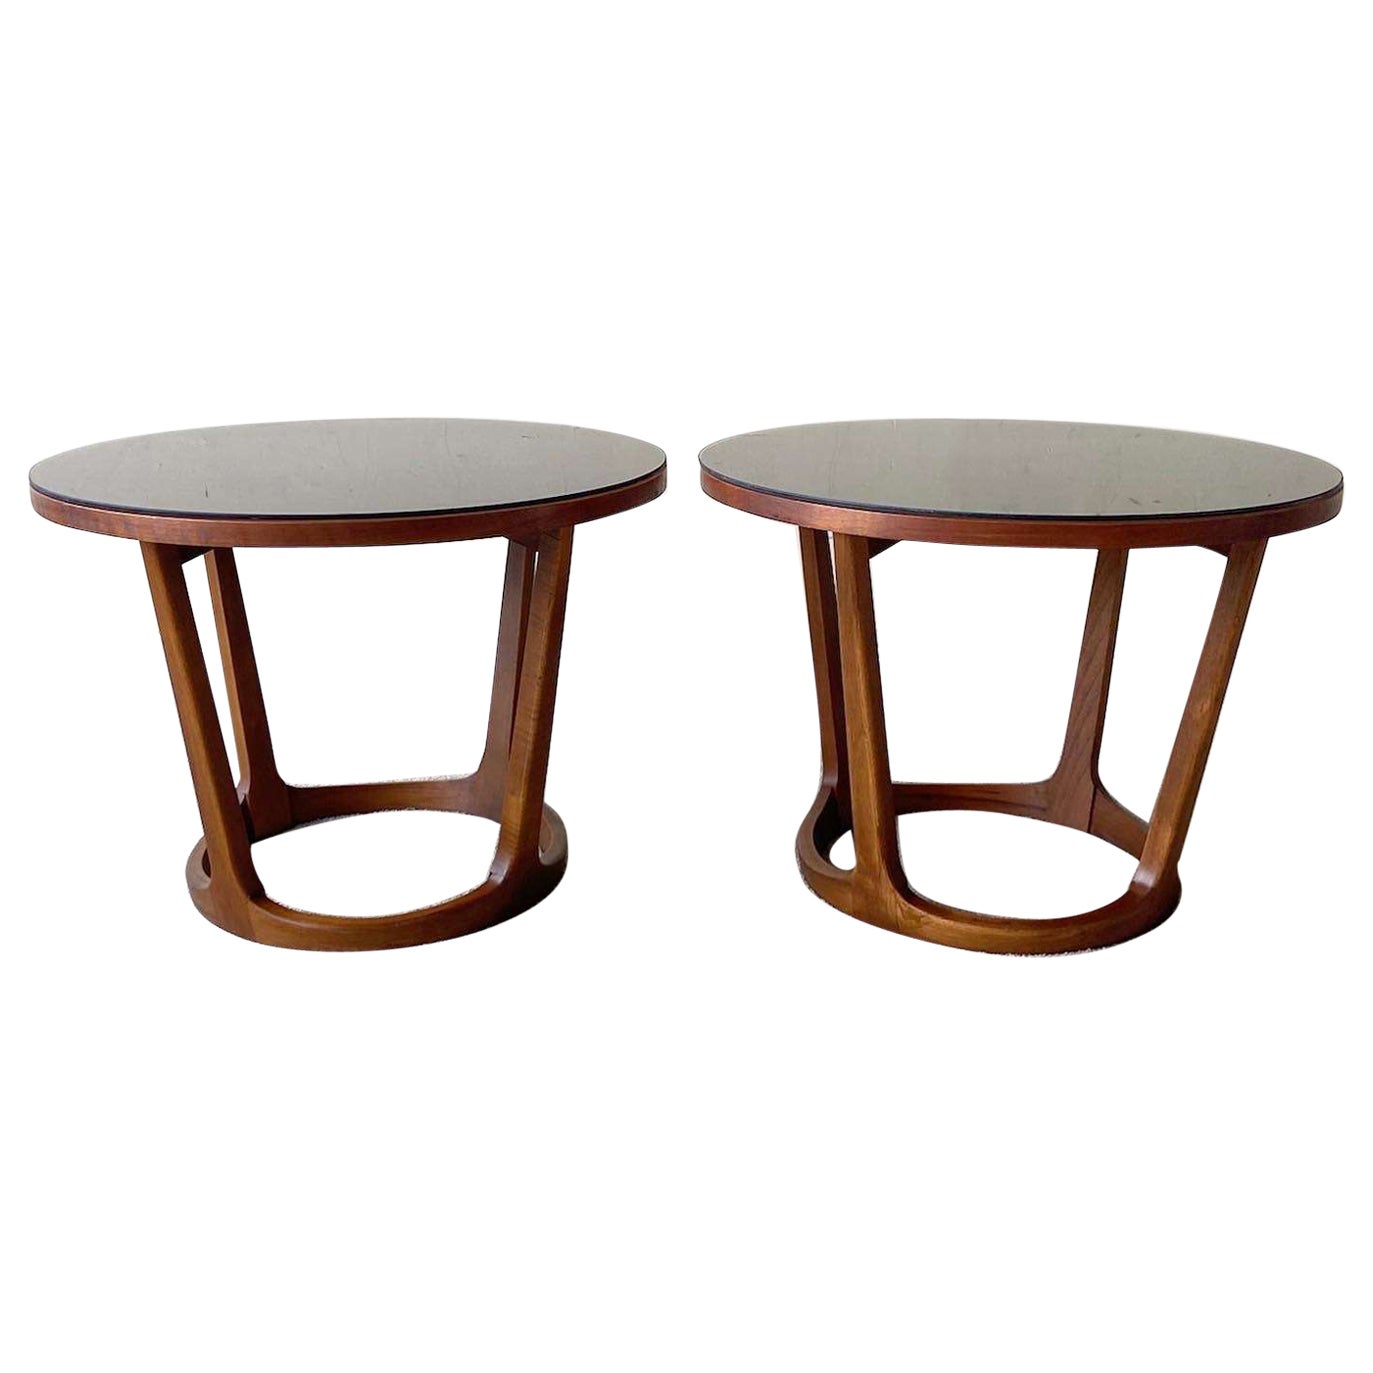 Mid Century Modern Circular Walnut Side Tables With Smoked Glass Top - a Pair